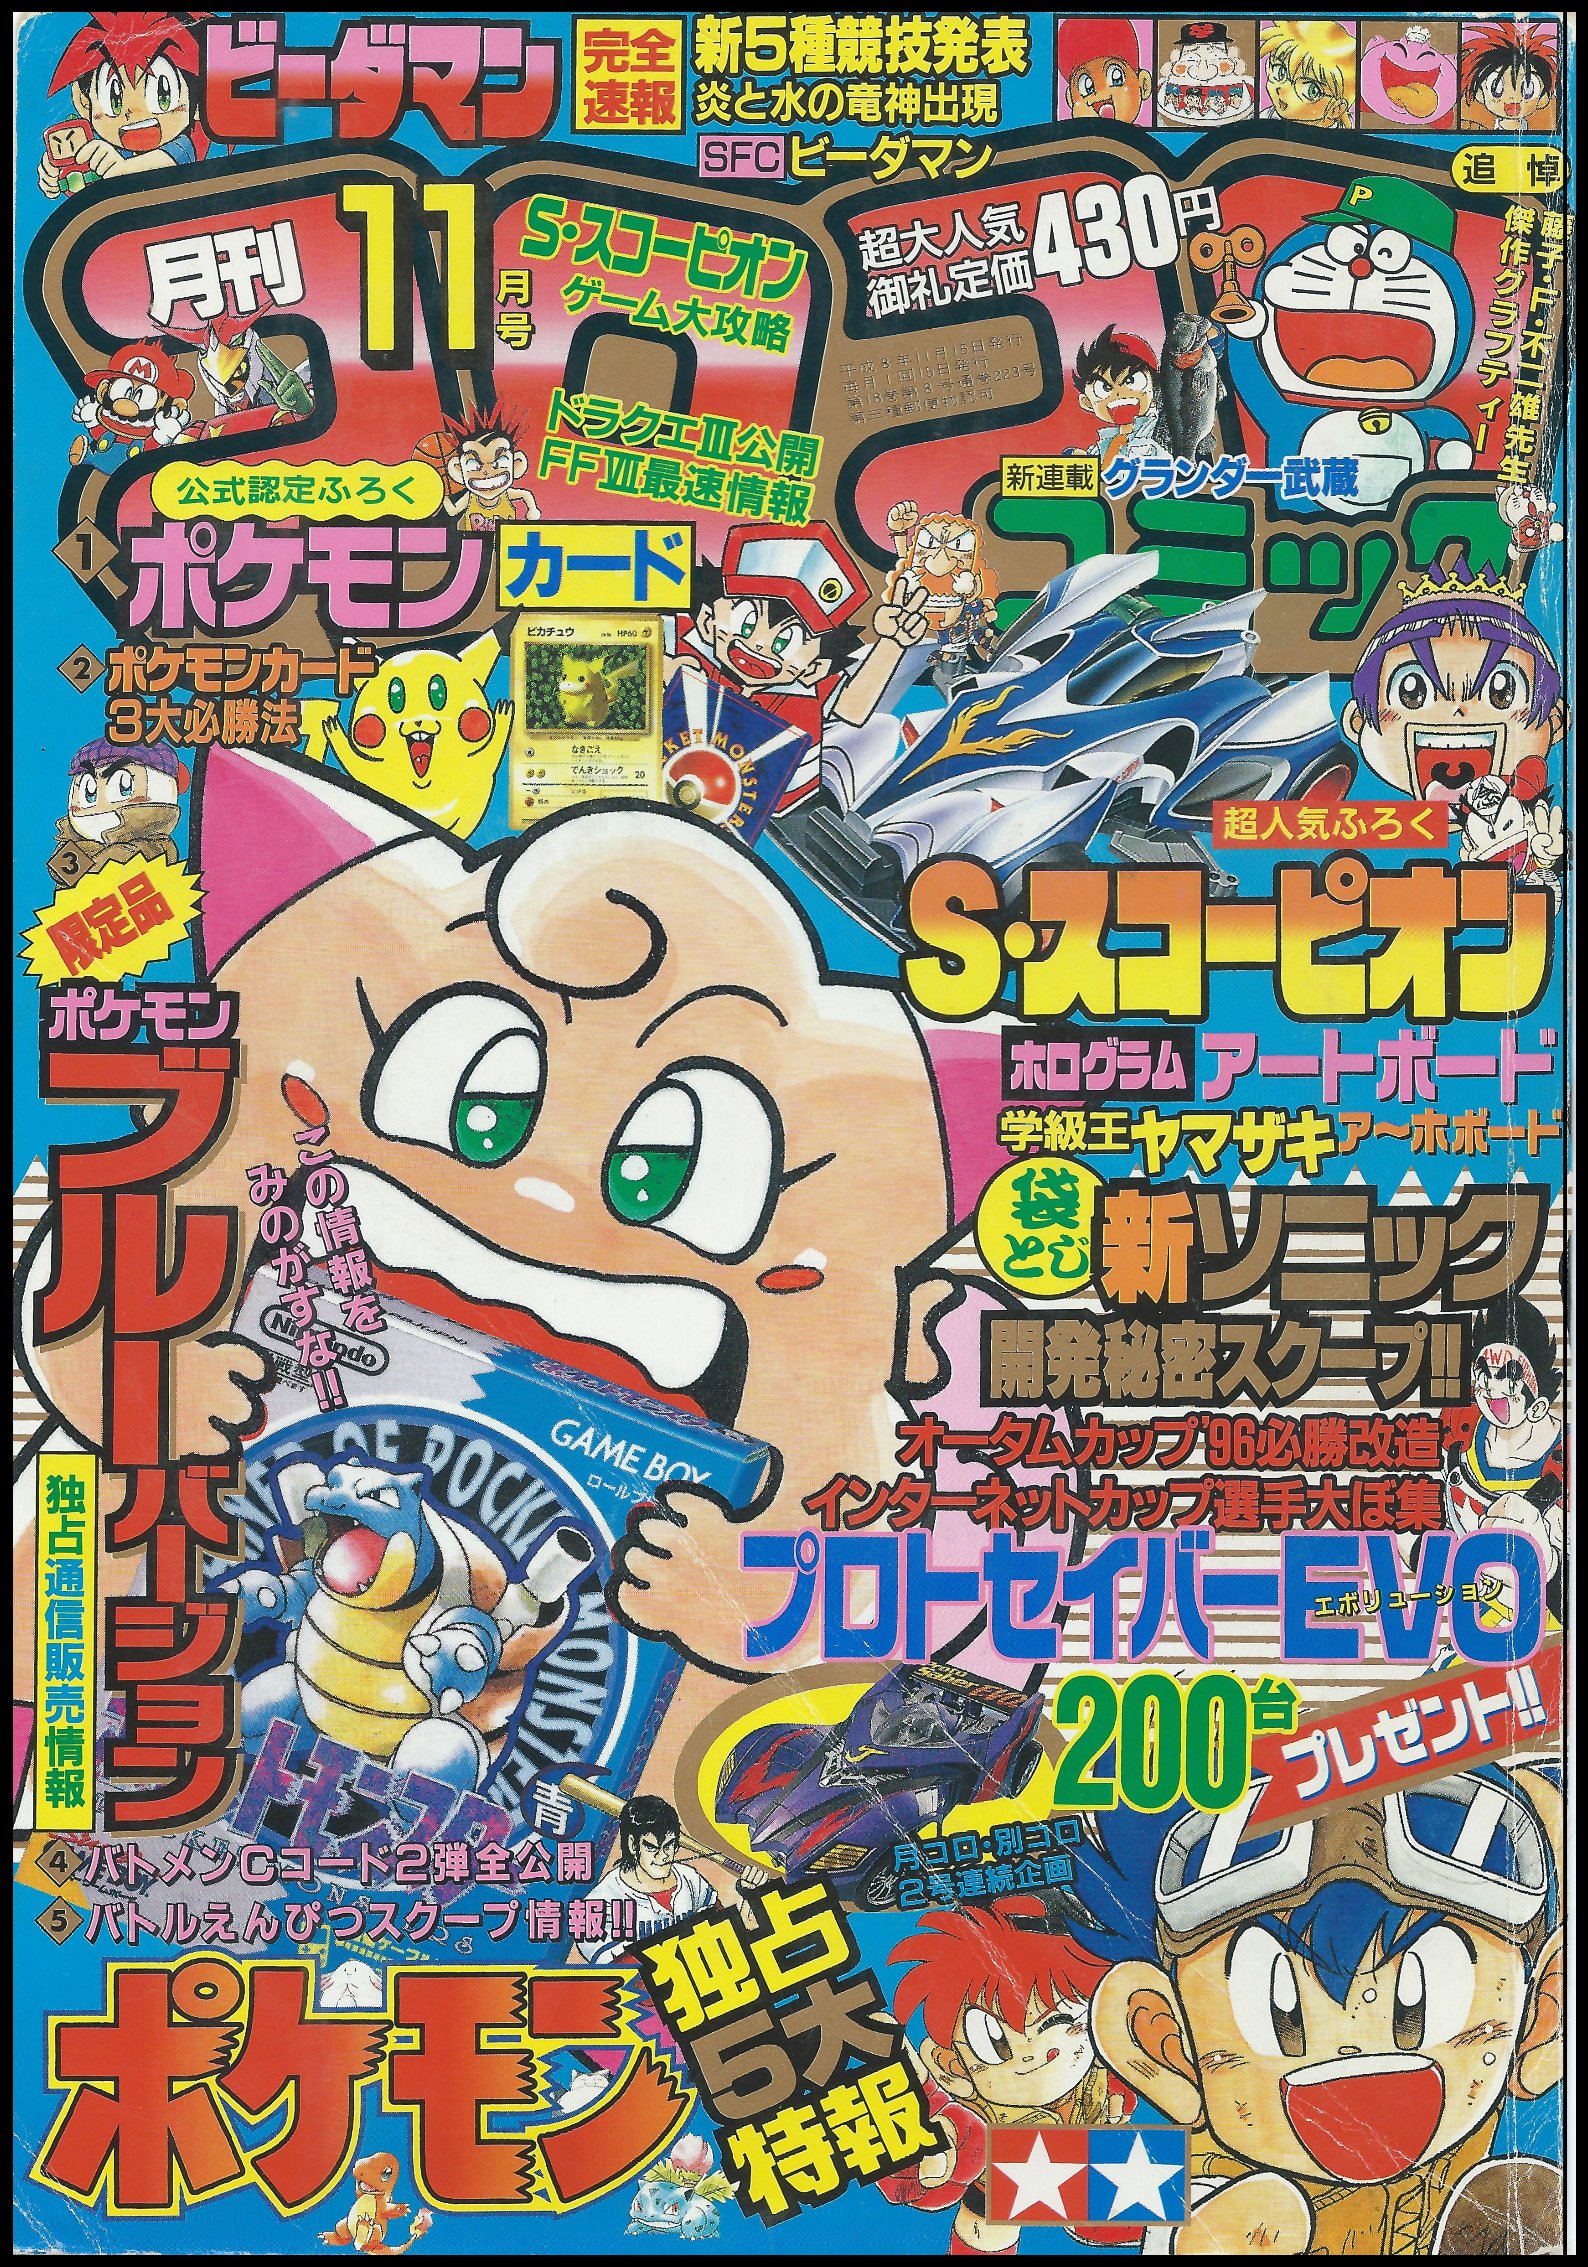 Dr Lava S Lost Pokemon New Pokemon Translation In 1996 Pokemon Blue Was Sold Exclusively To Japanese Fans Who Bought One Particular Issue Of Corocoro Comic This Translation Covers The Issue S